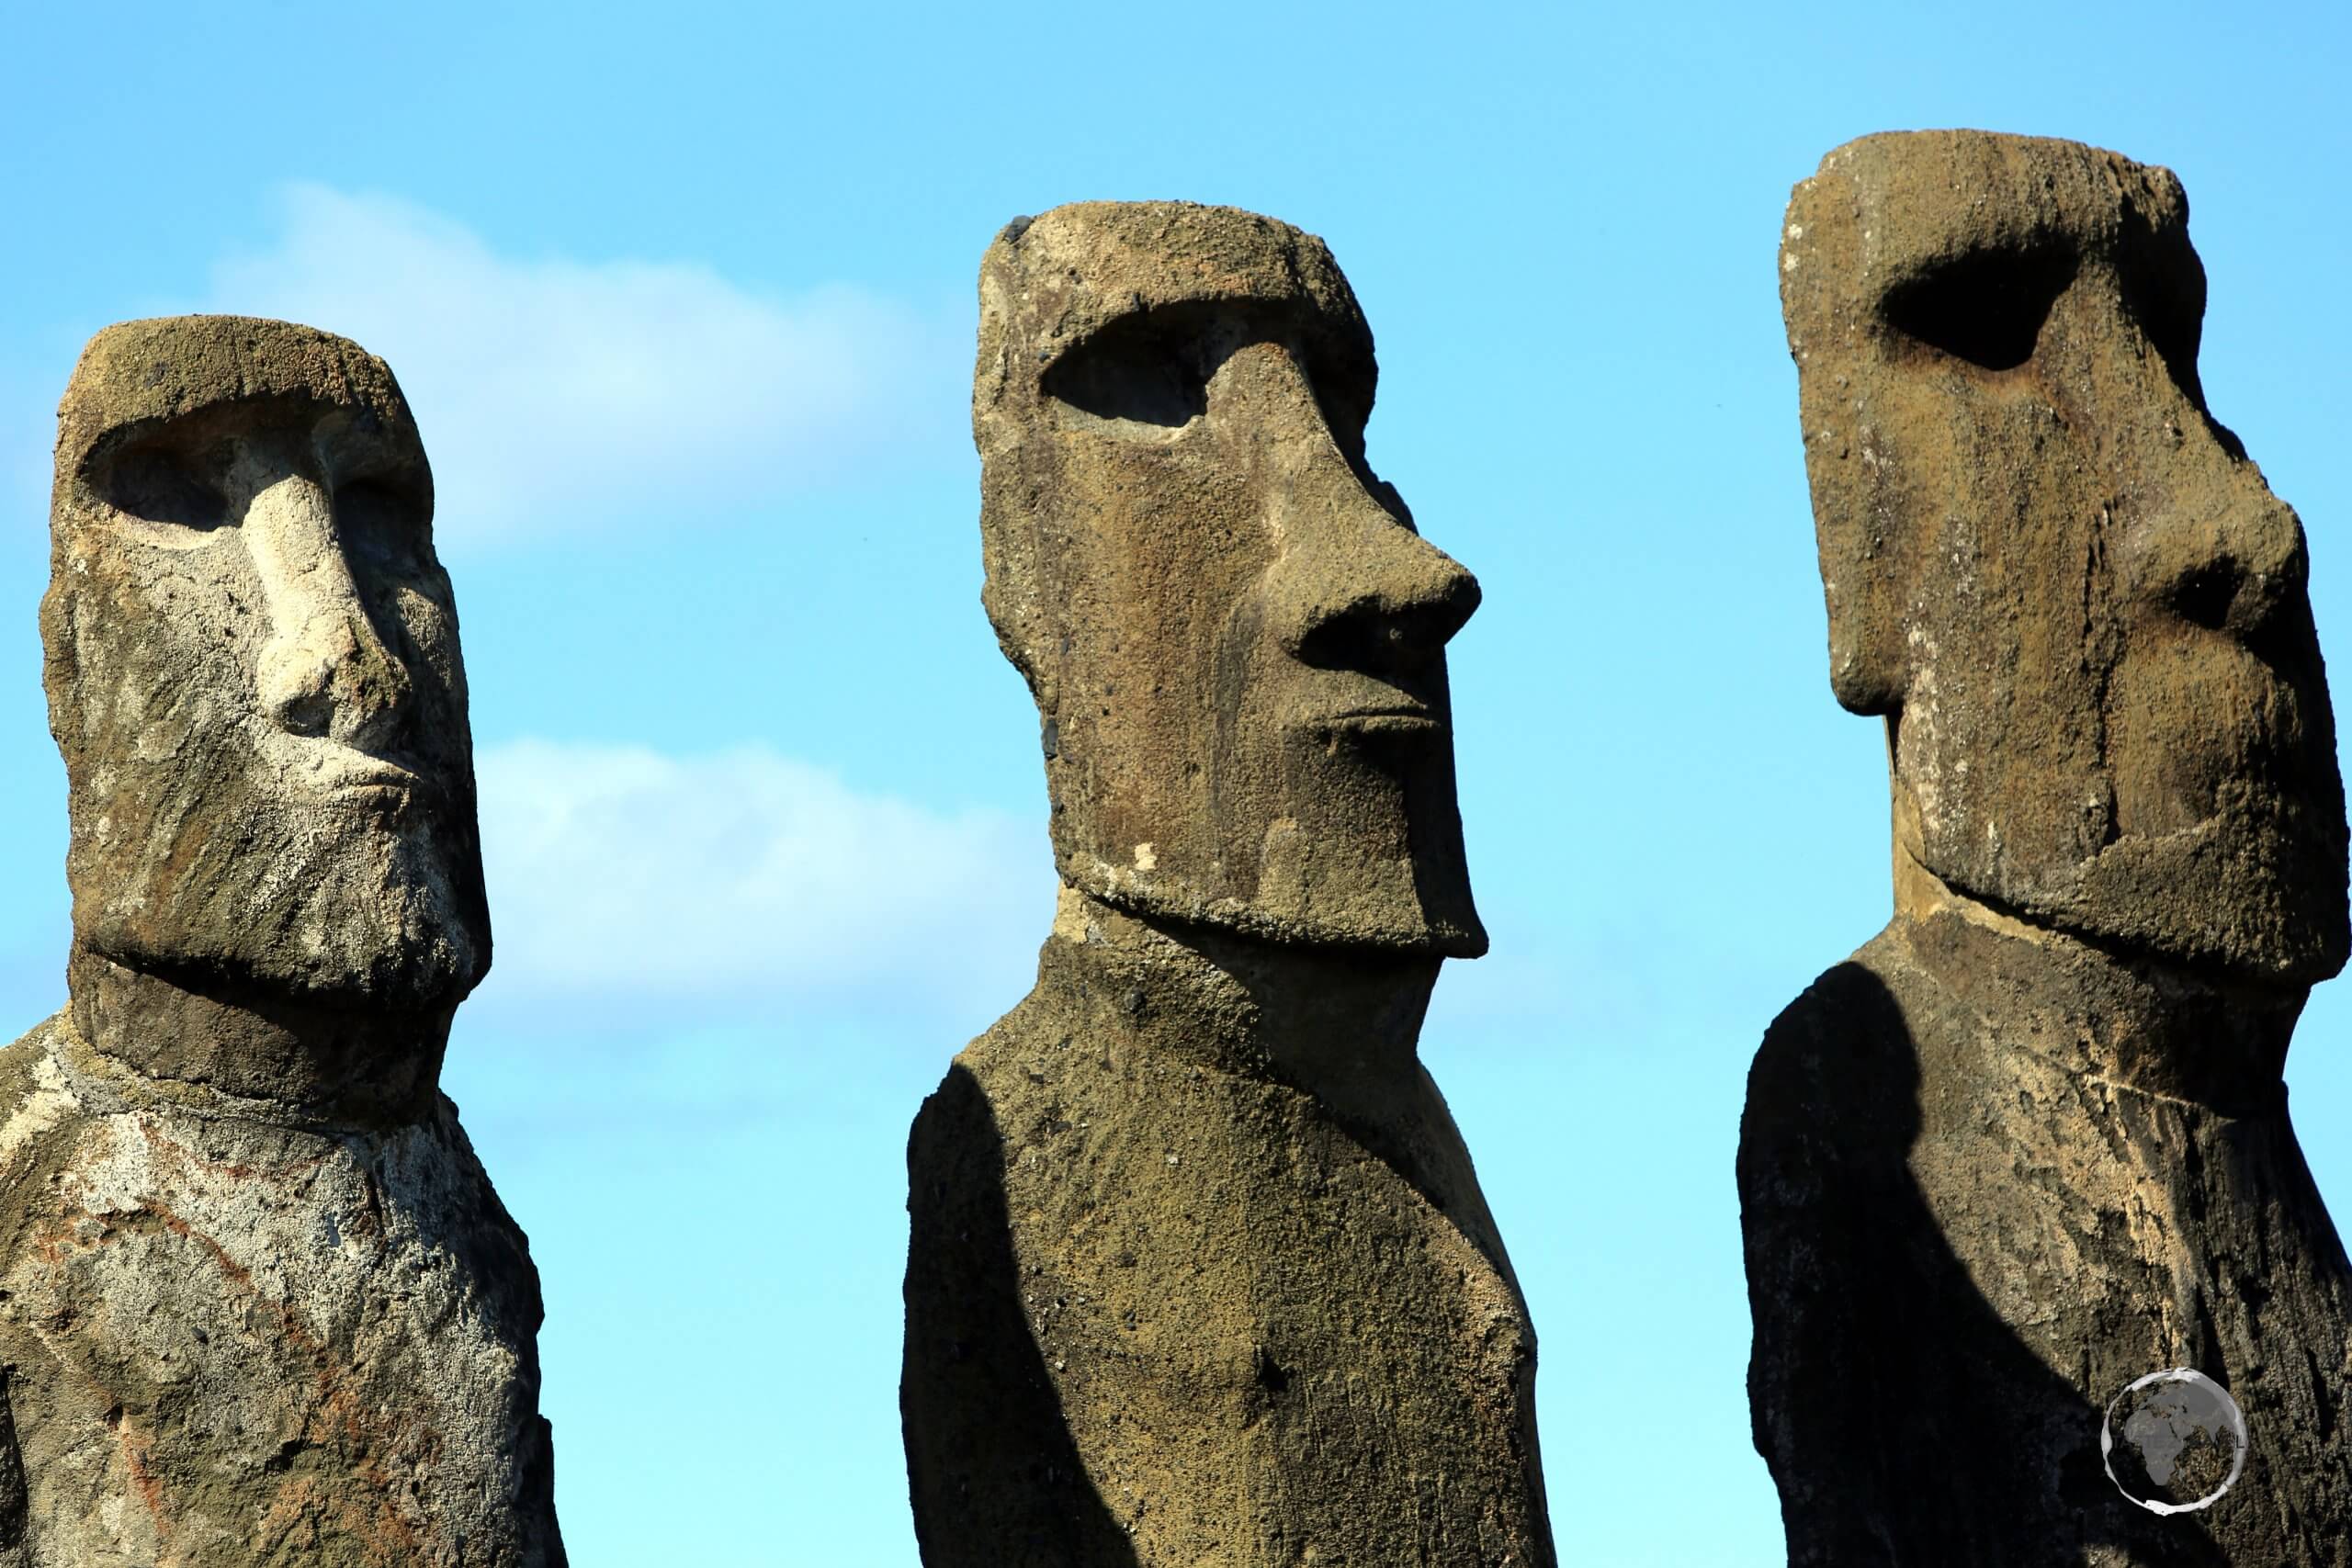 All moai were installed with empty eye sockets. Once their eyes were added, the statue was given 'life', and was then able to offer protection to the inhabitants of Easter Island.